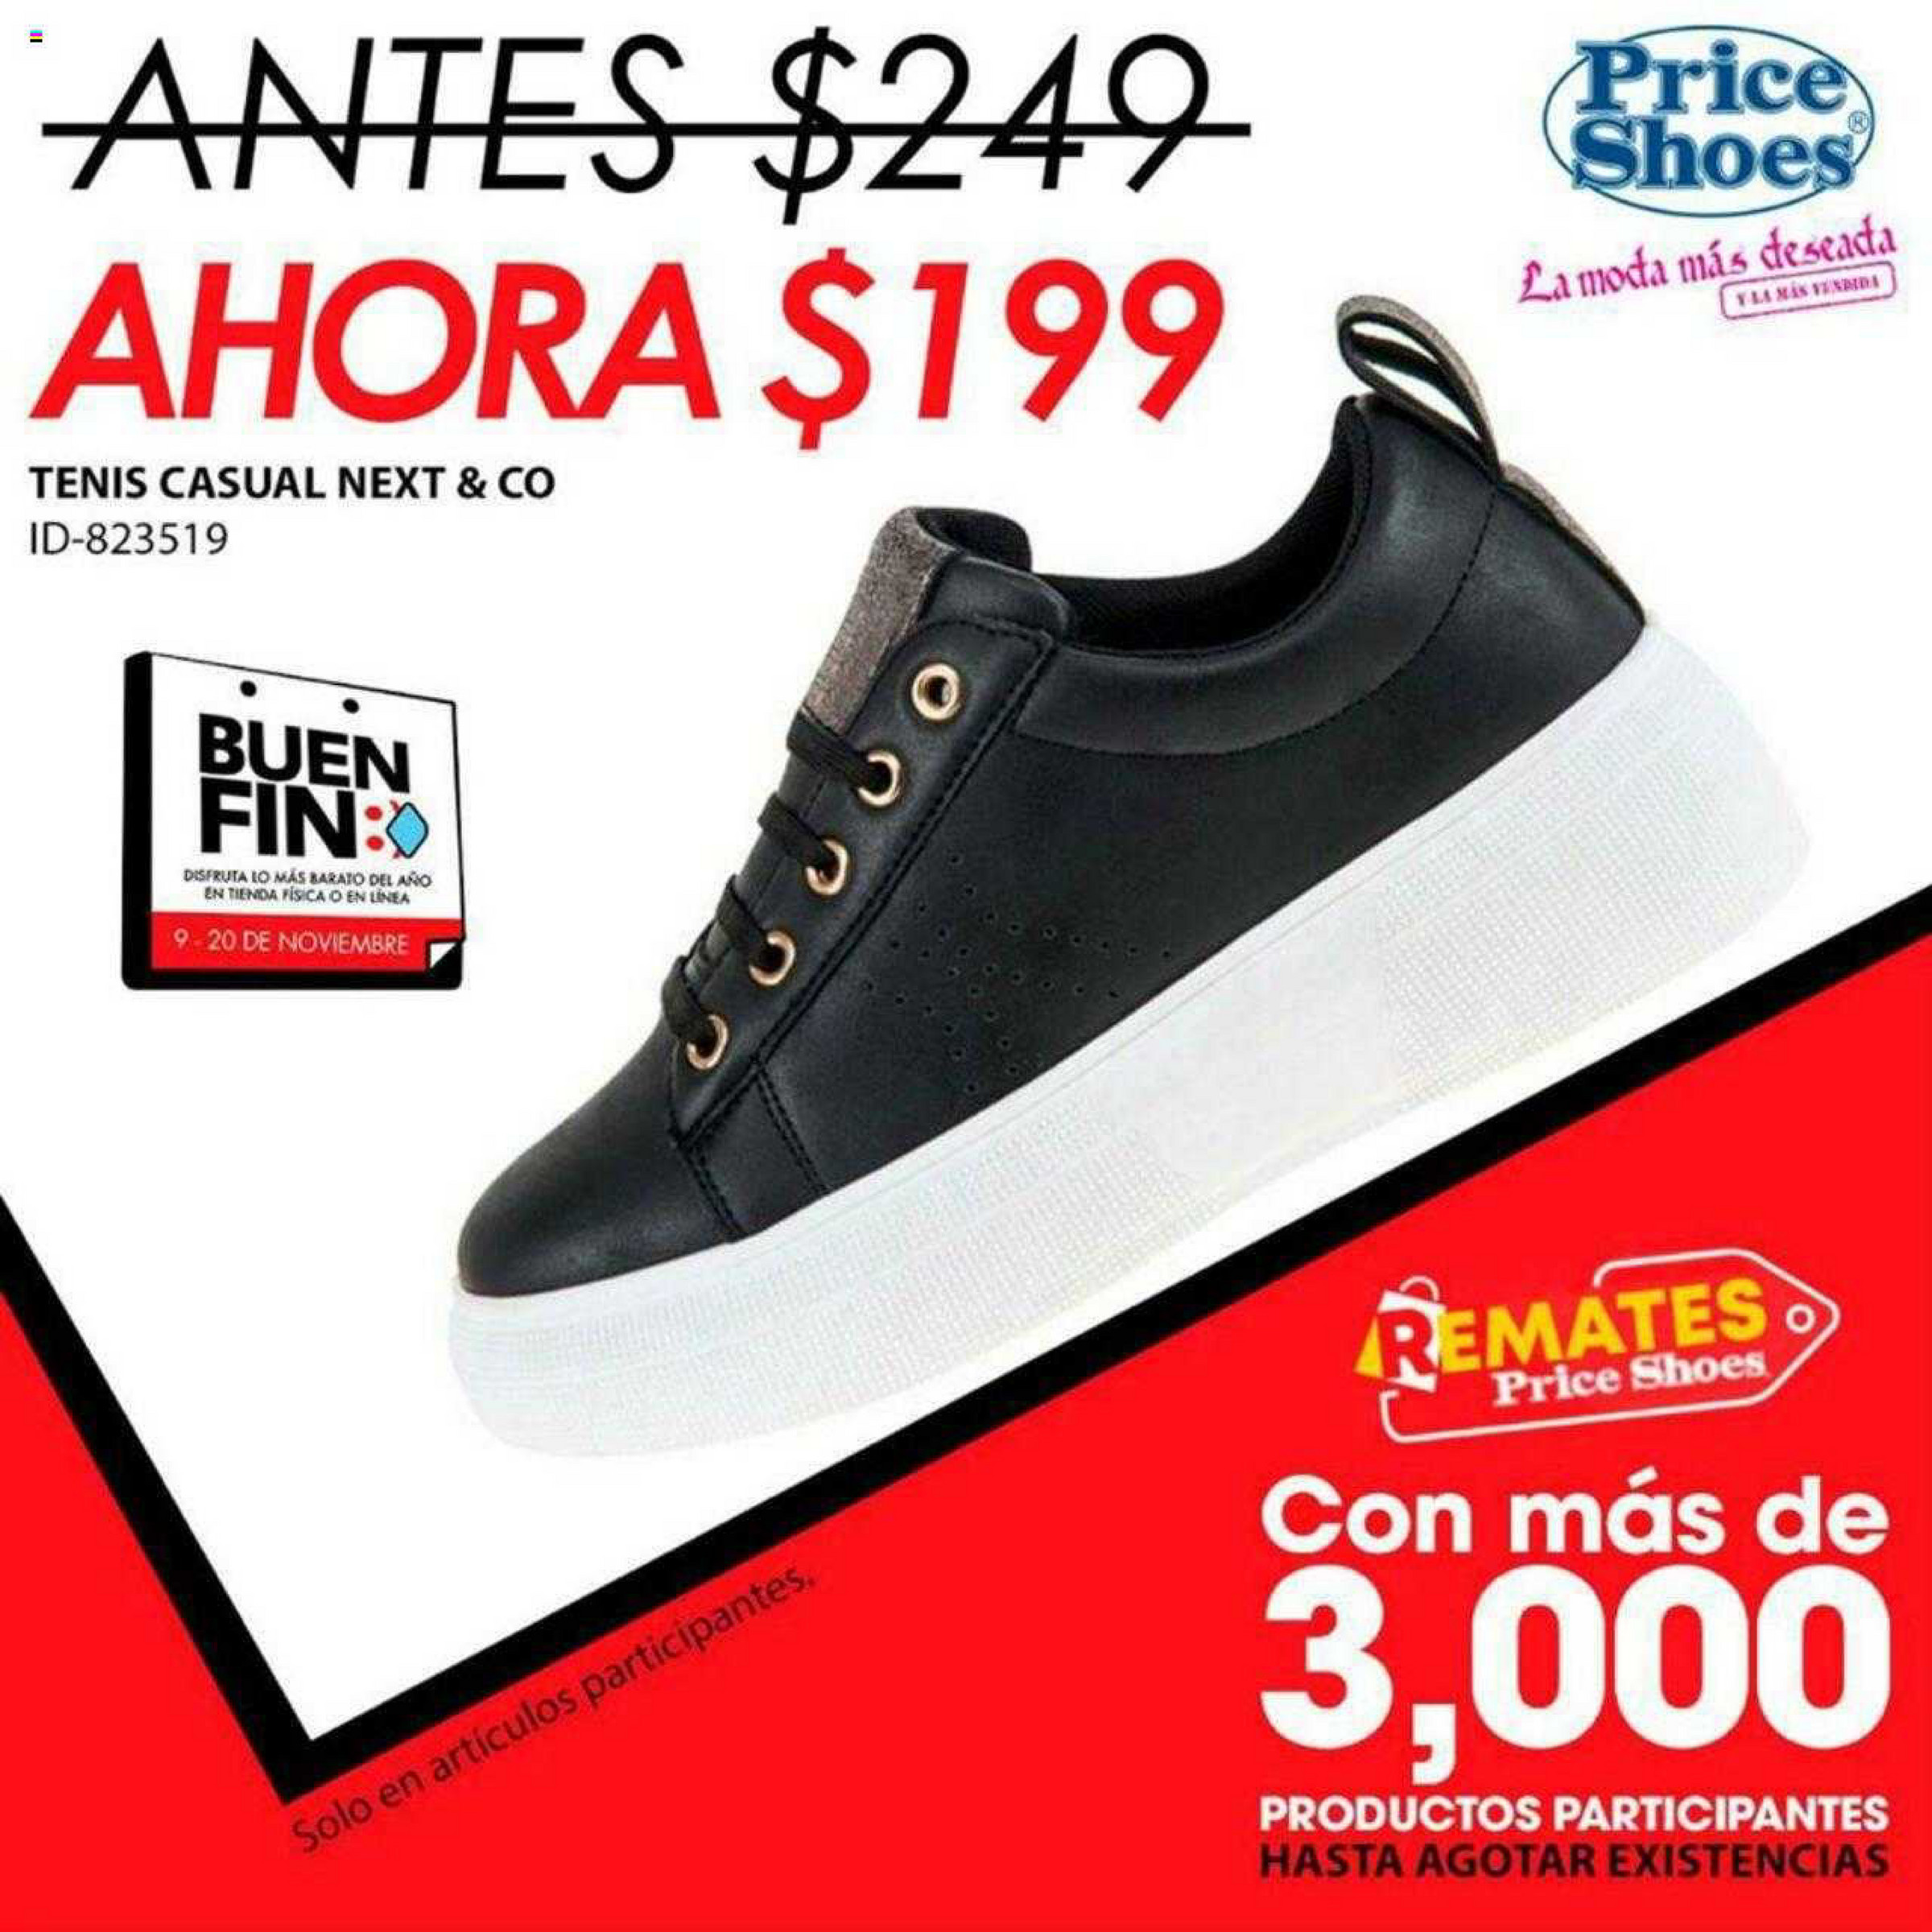 zapatos - price shoes - Página 2-3 - Created with 